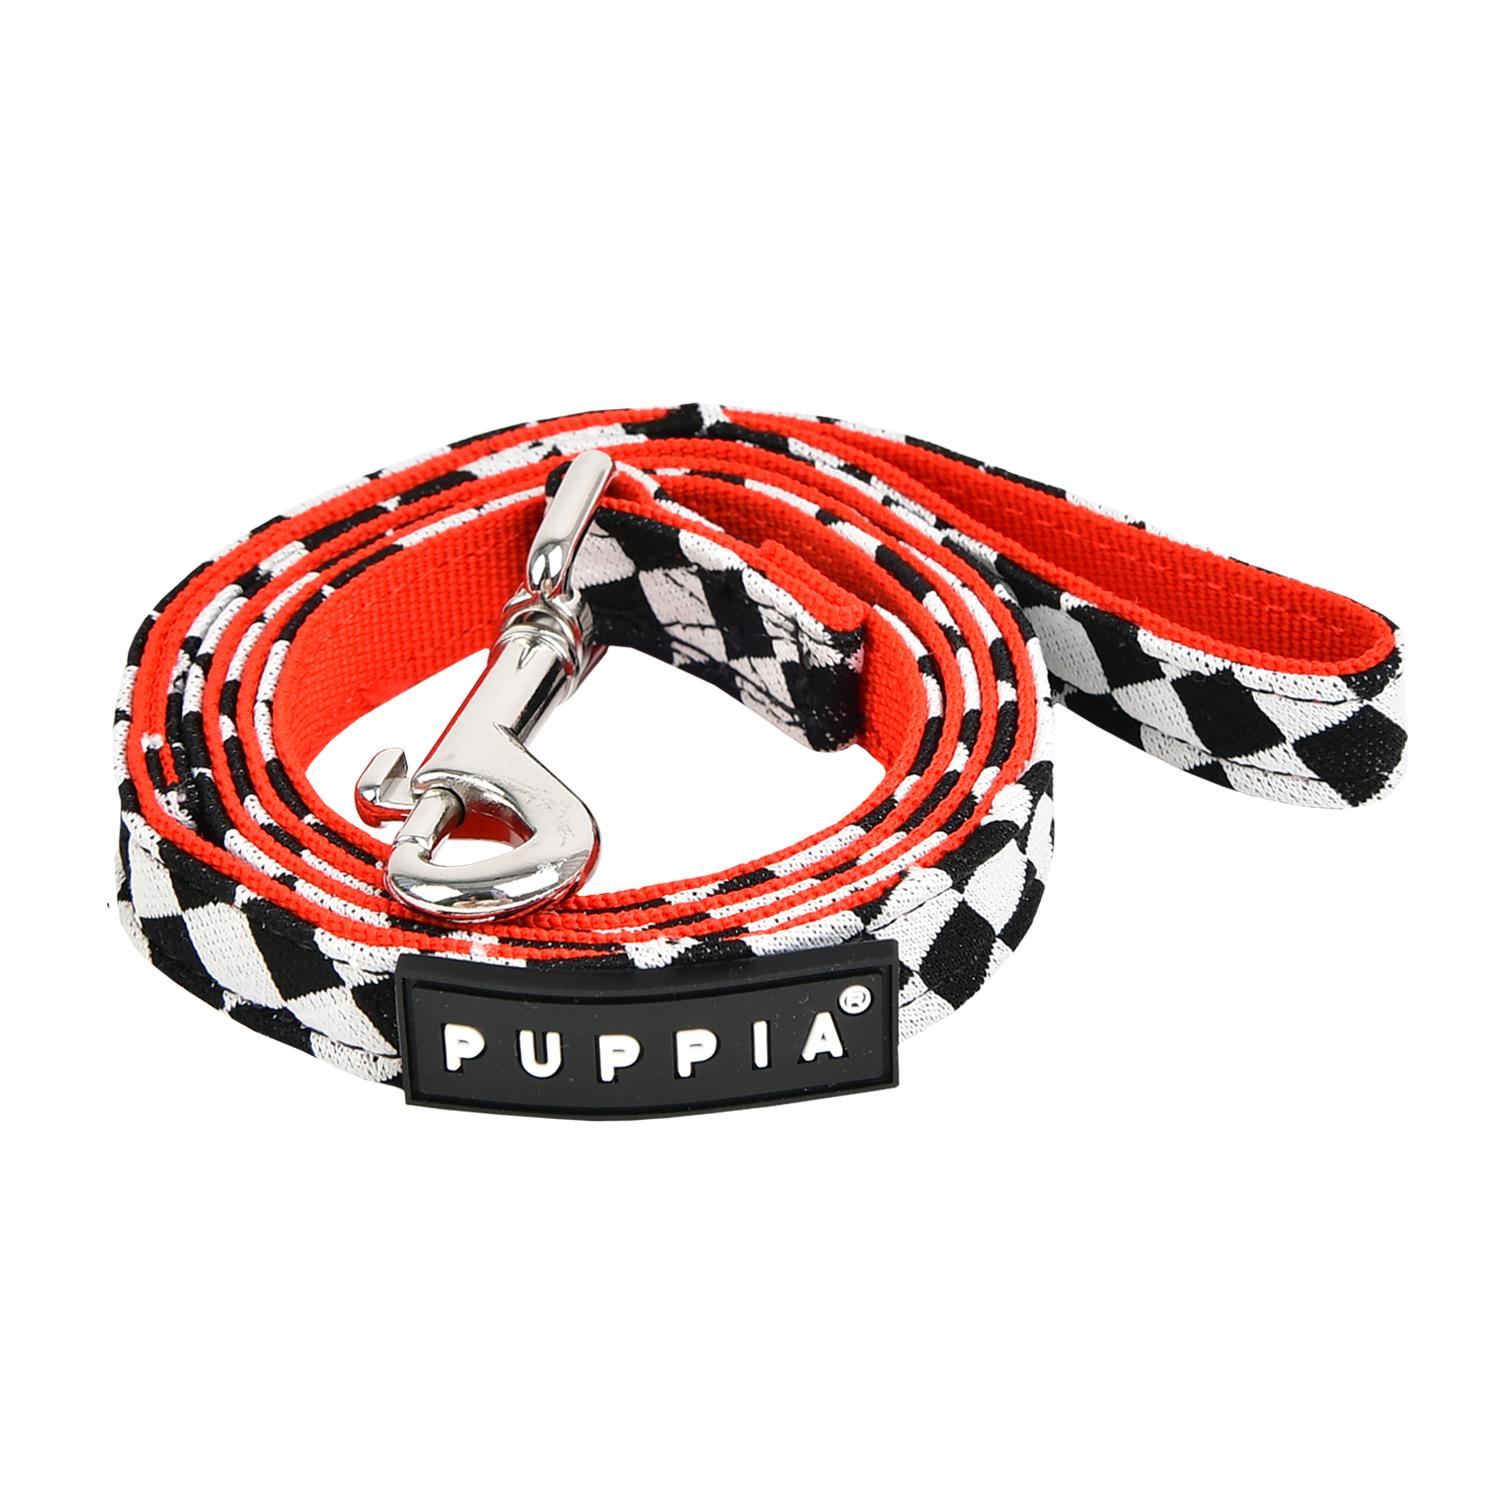 Racer Dog Leash by Puppia - Red